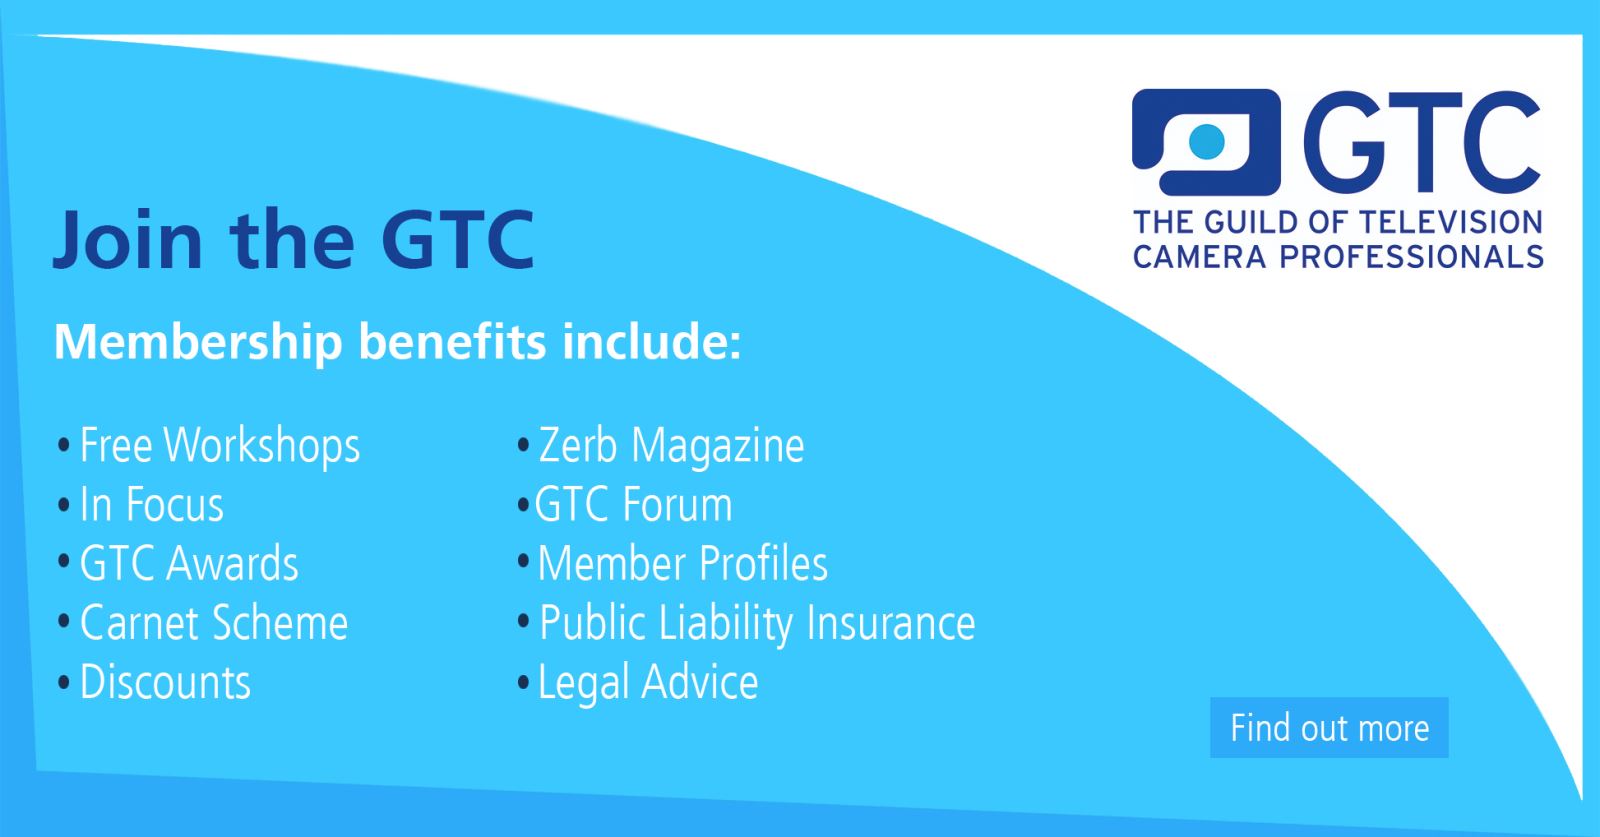 Thinking of joining the GTC, find out more about the benefits